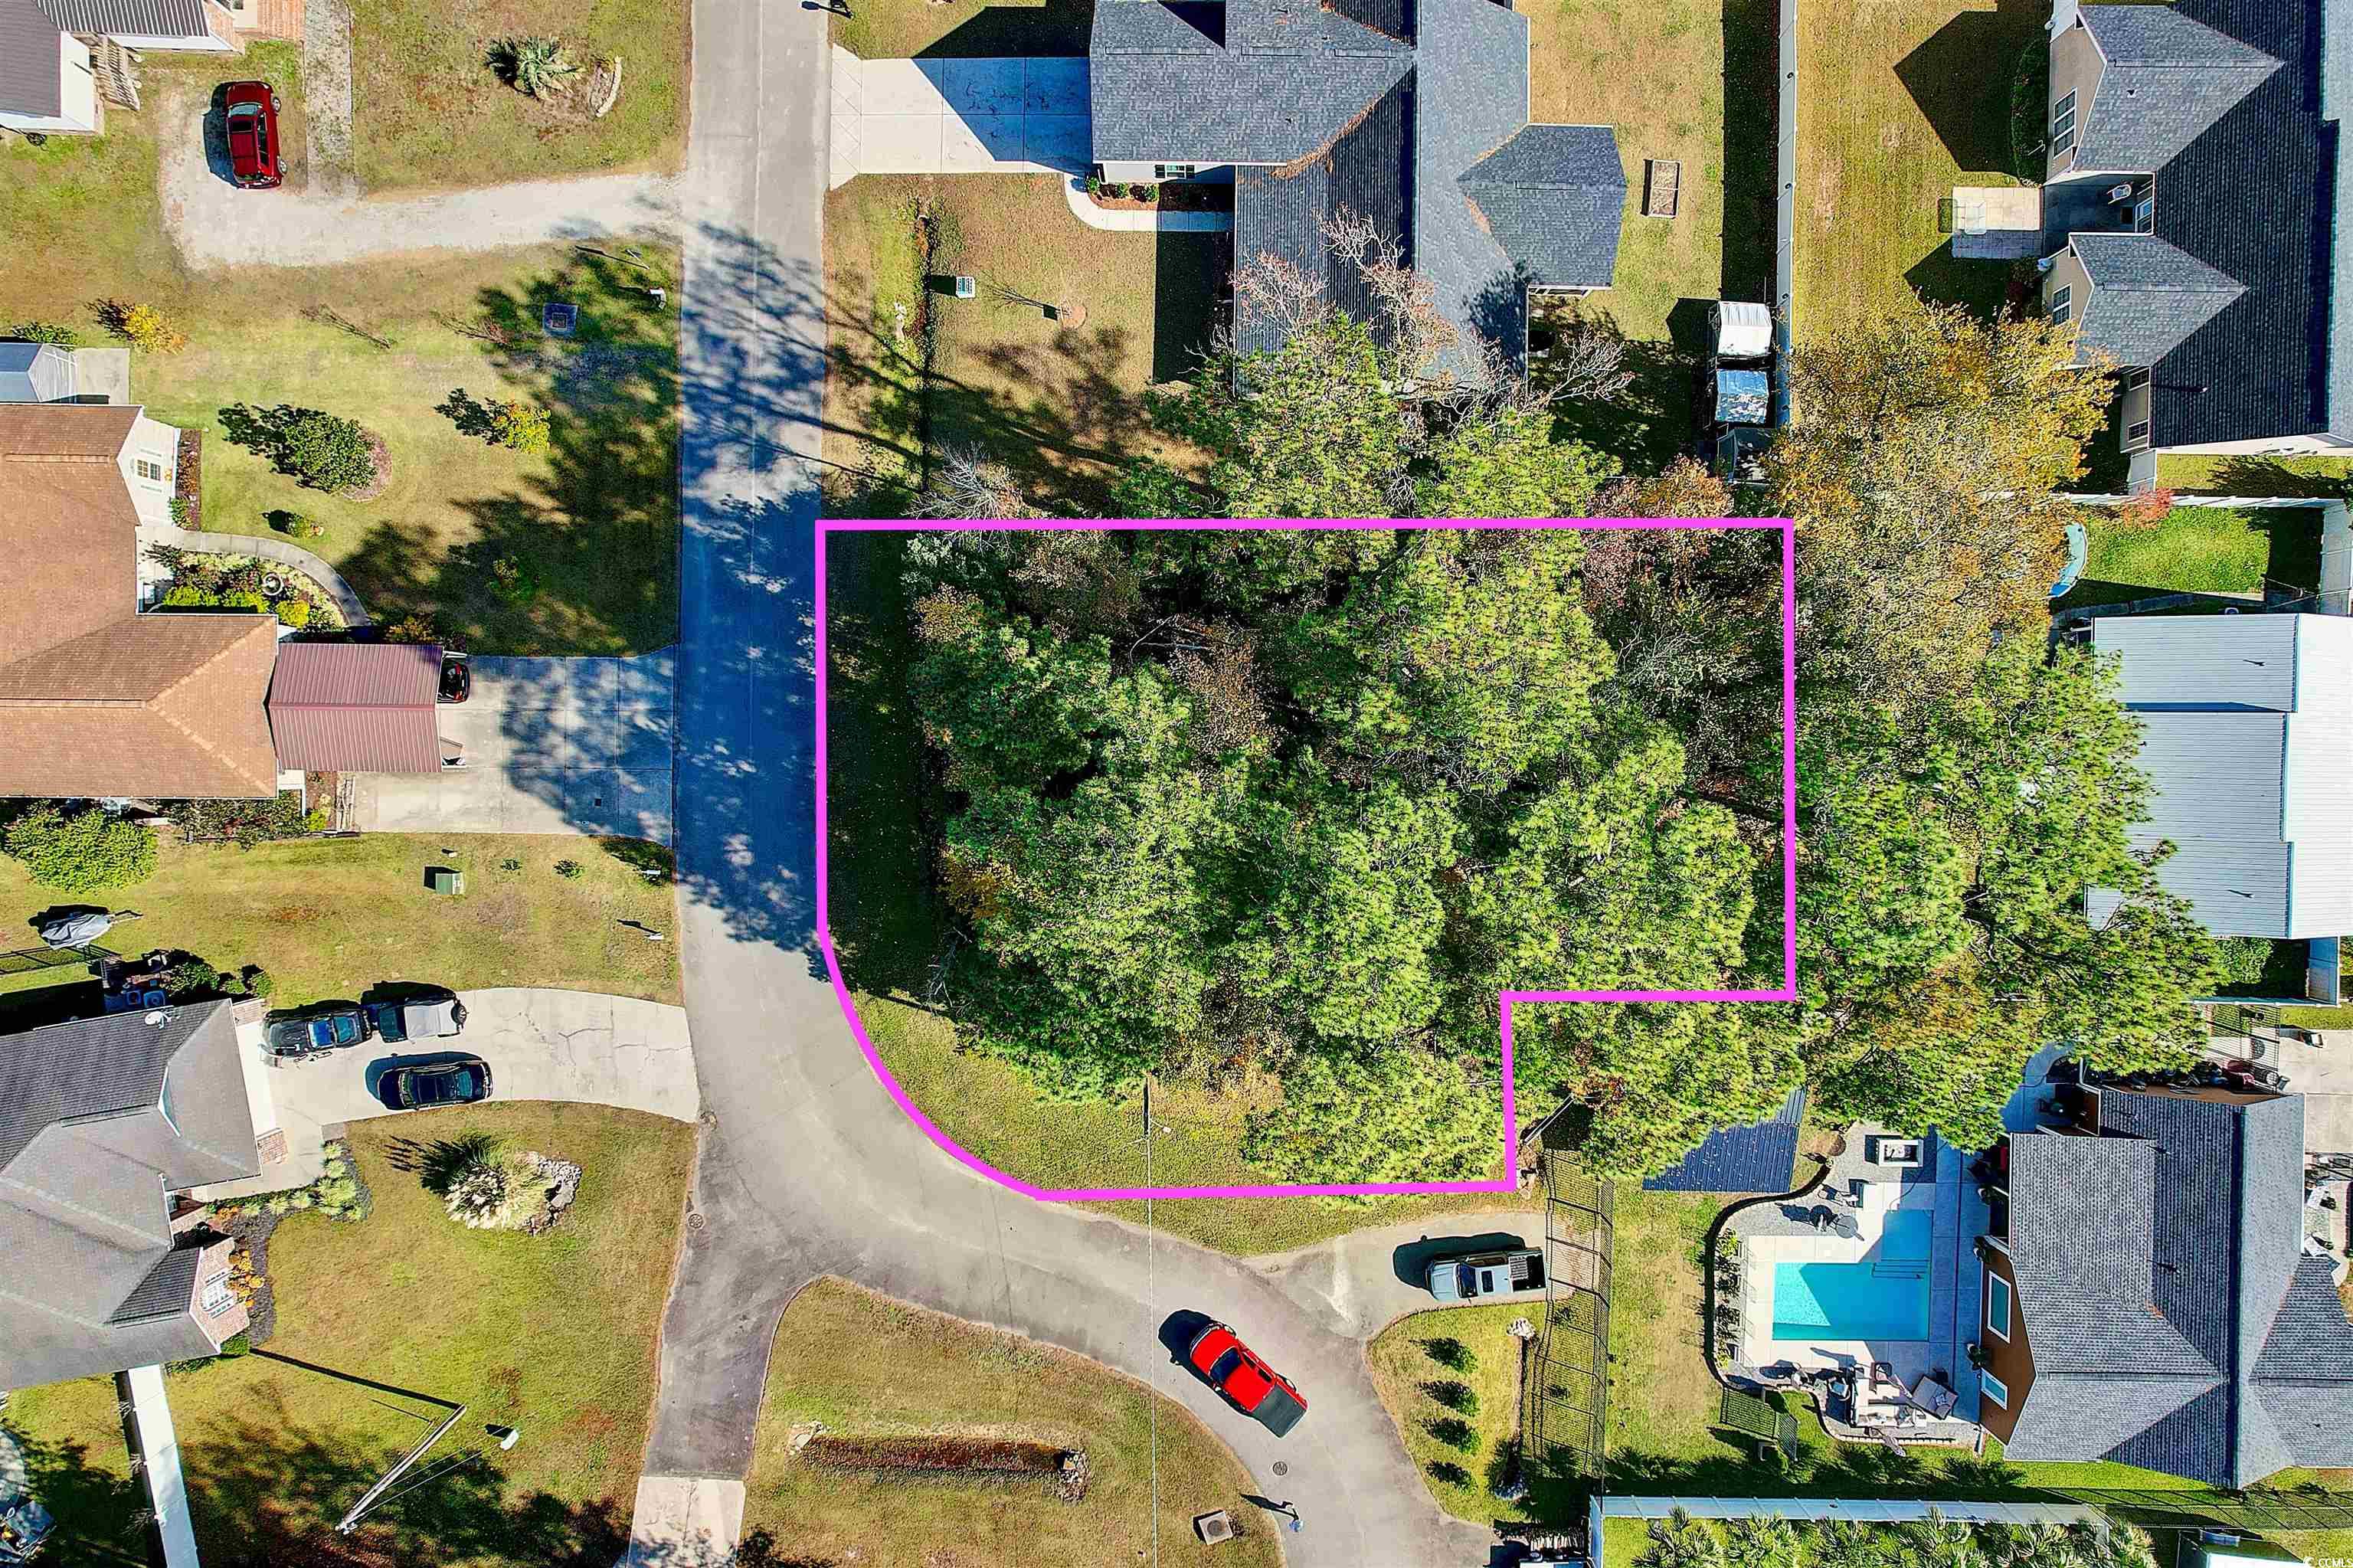 corner lot in the highly desired neighborhood of bay forest in little river is vacant and ready to build your dream home! no hoa. close to all schools, dining, entertainment, intracoastal waterway, and the beach.